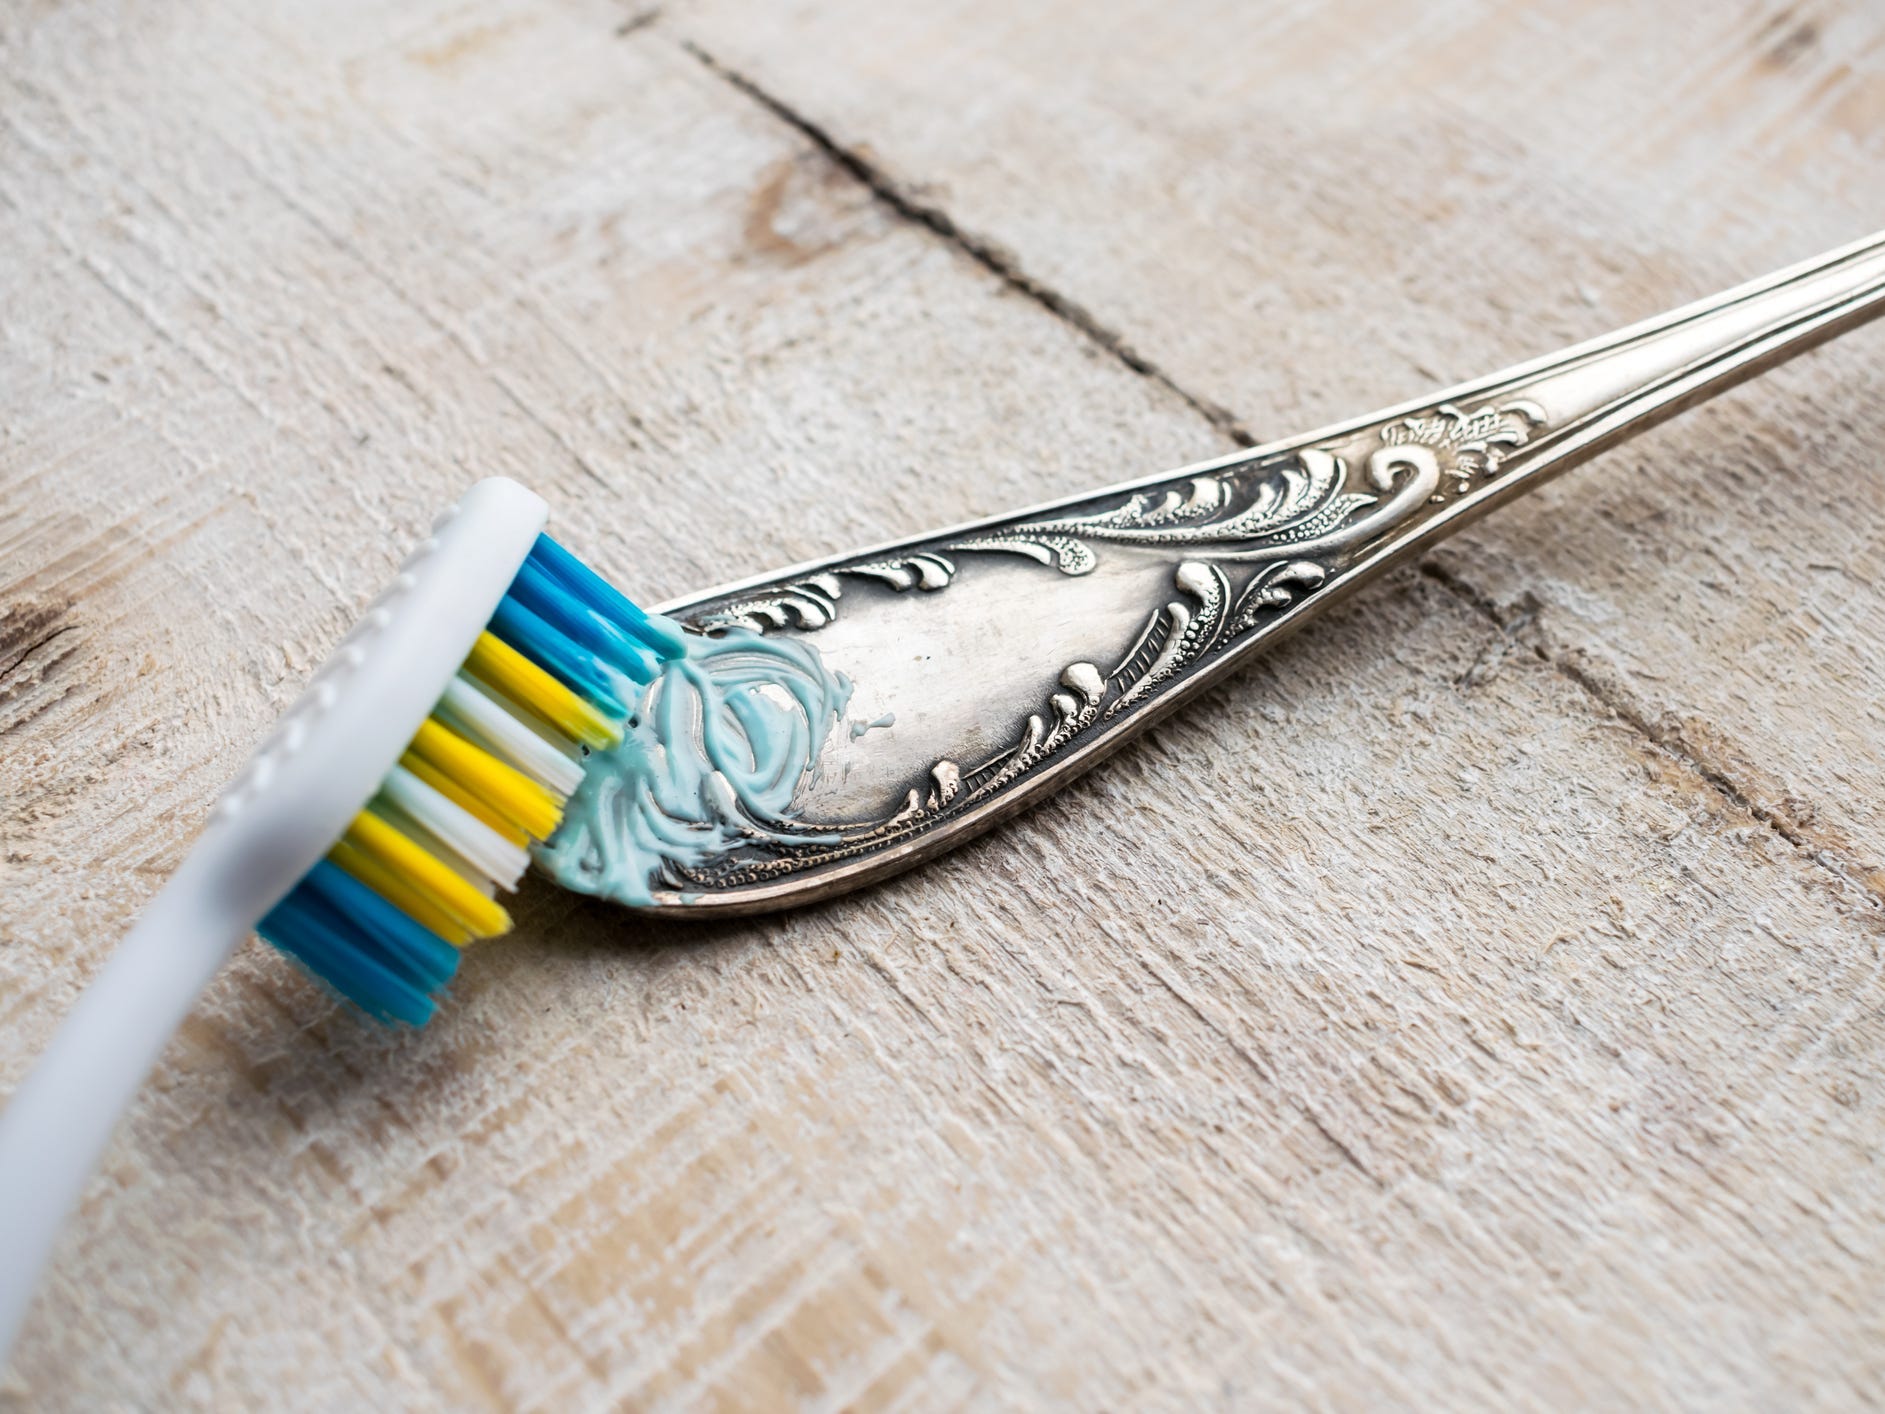 A toothbrush scrubbing toothpaste onto the ornate handle of a silver utensil